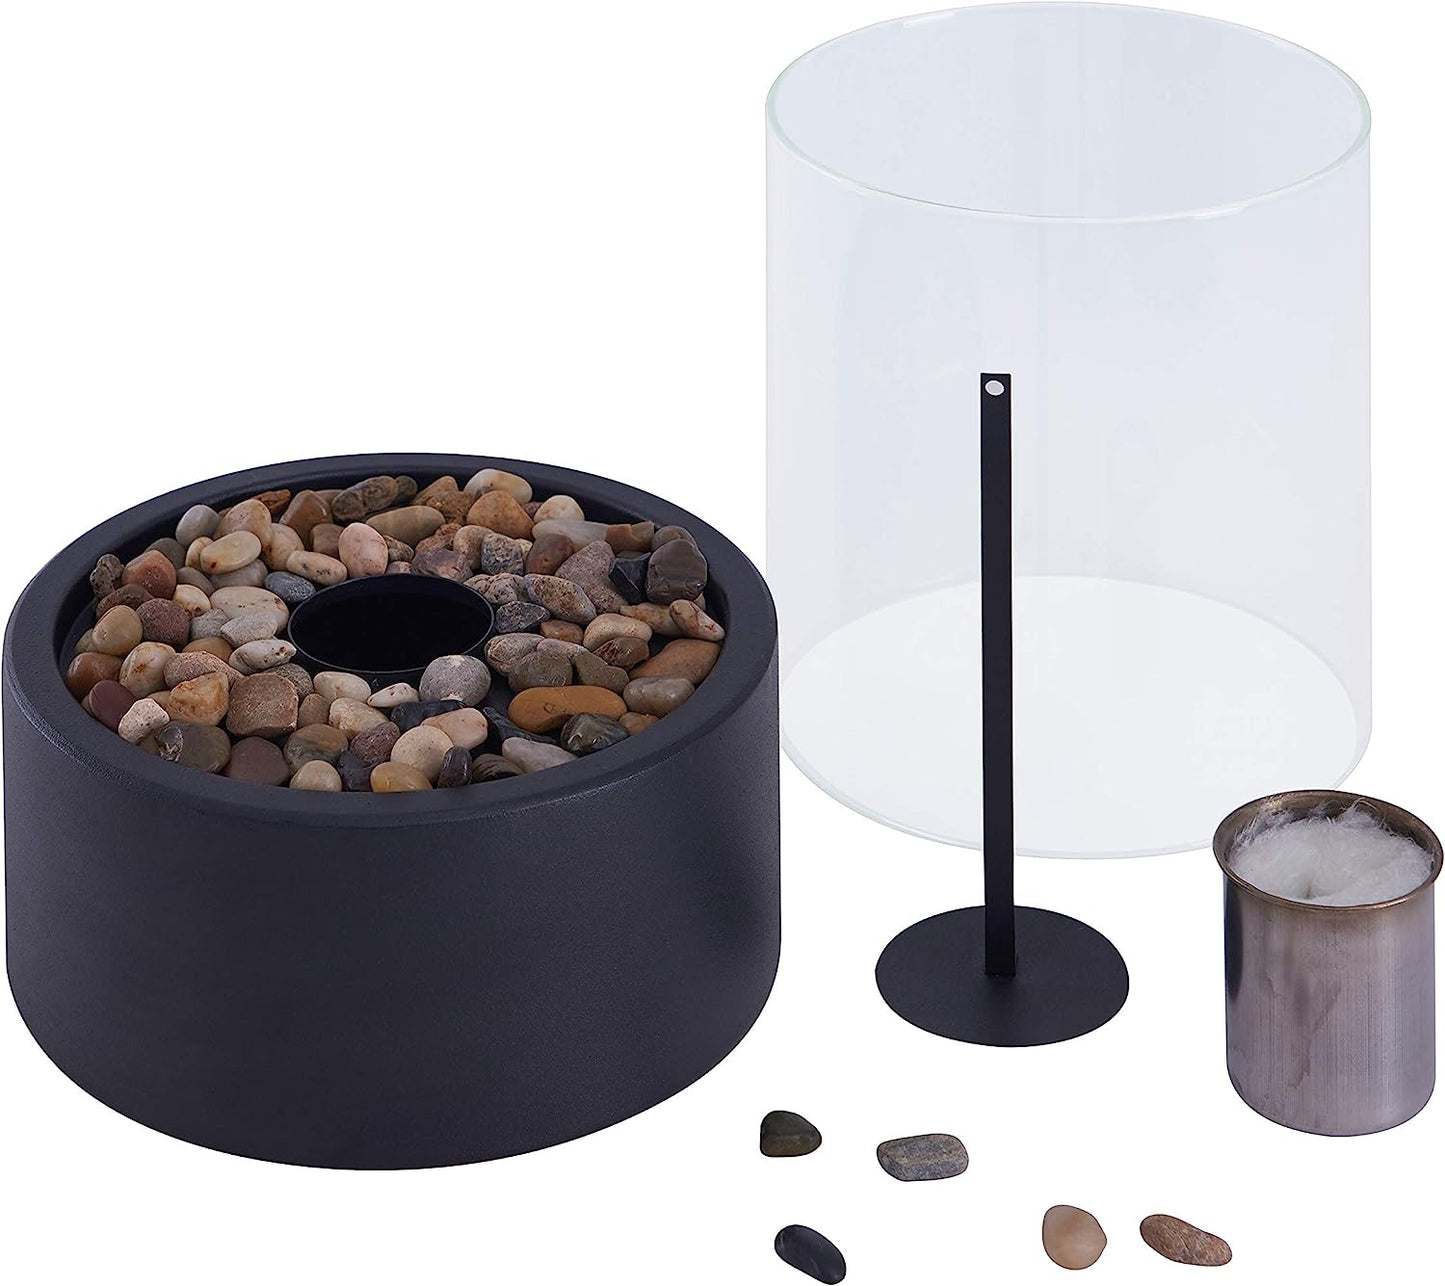 Indoor/Outdoor Portable Tabletop Fire Pit – Clean-Burning Bio Ethanol Ventless Fireplace - Small